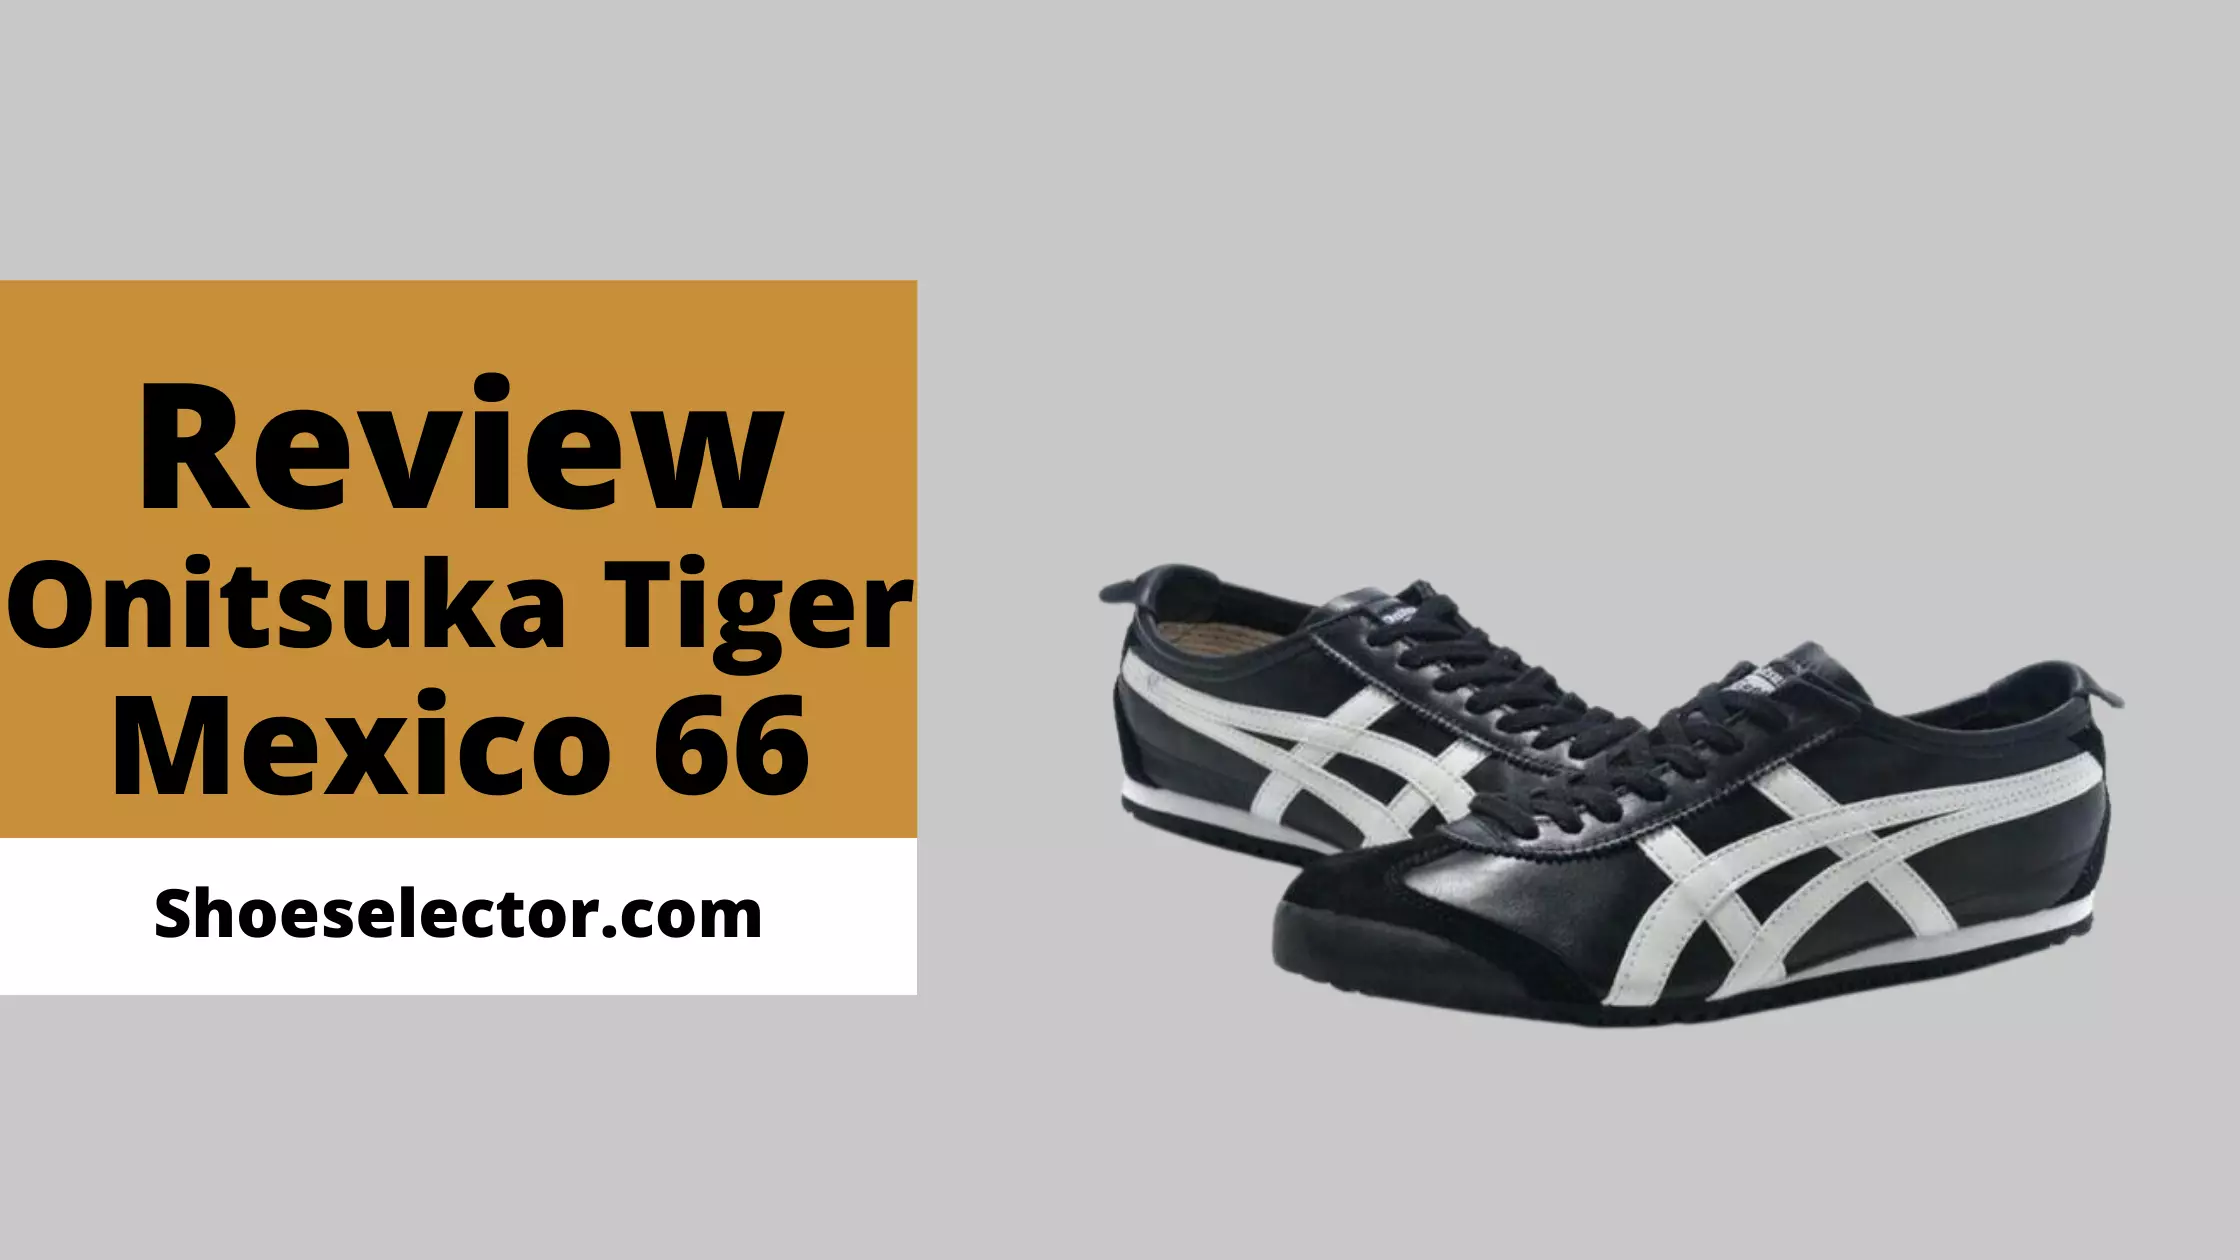 Onitsuka Tiger Mexico 66 Review - Recommended Guide